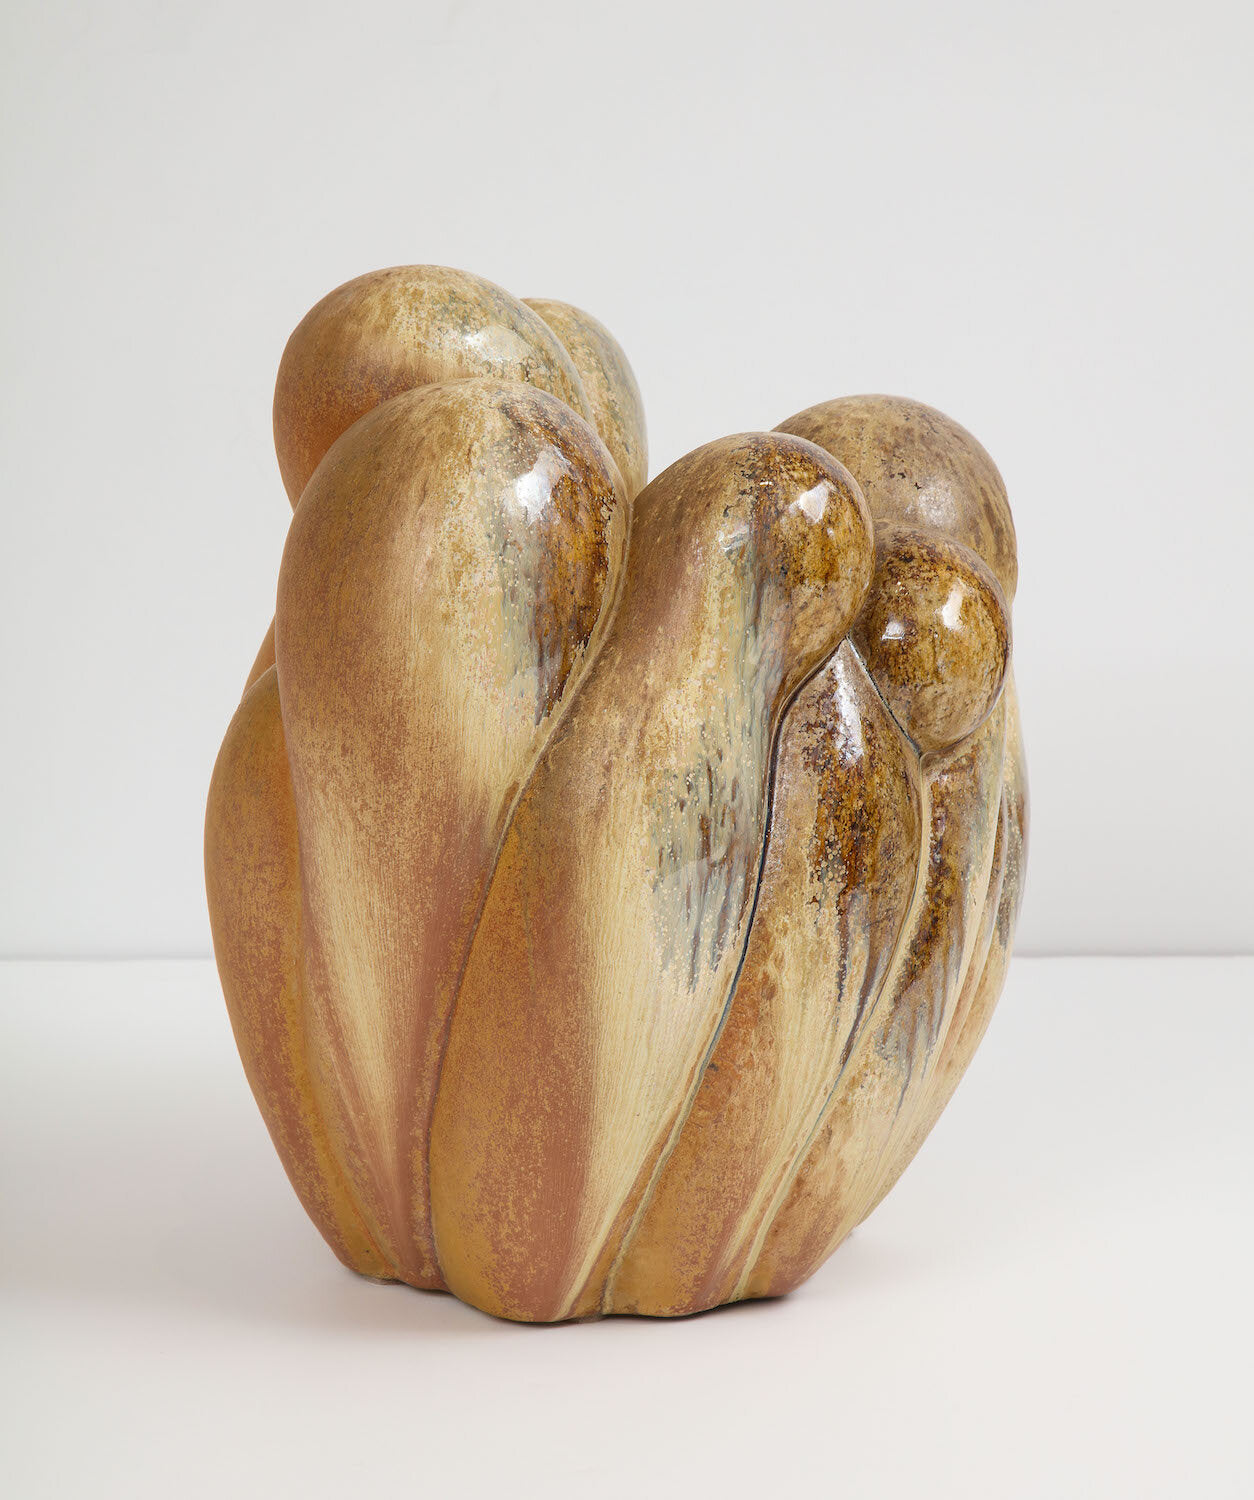 Untitled Sculpture #7 by Rosanne Sniderman